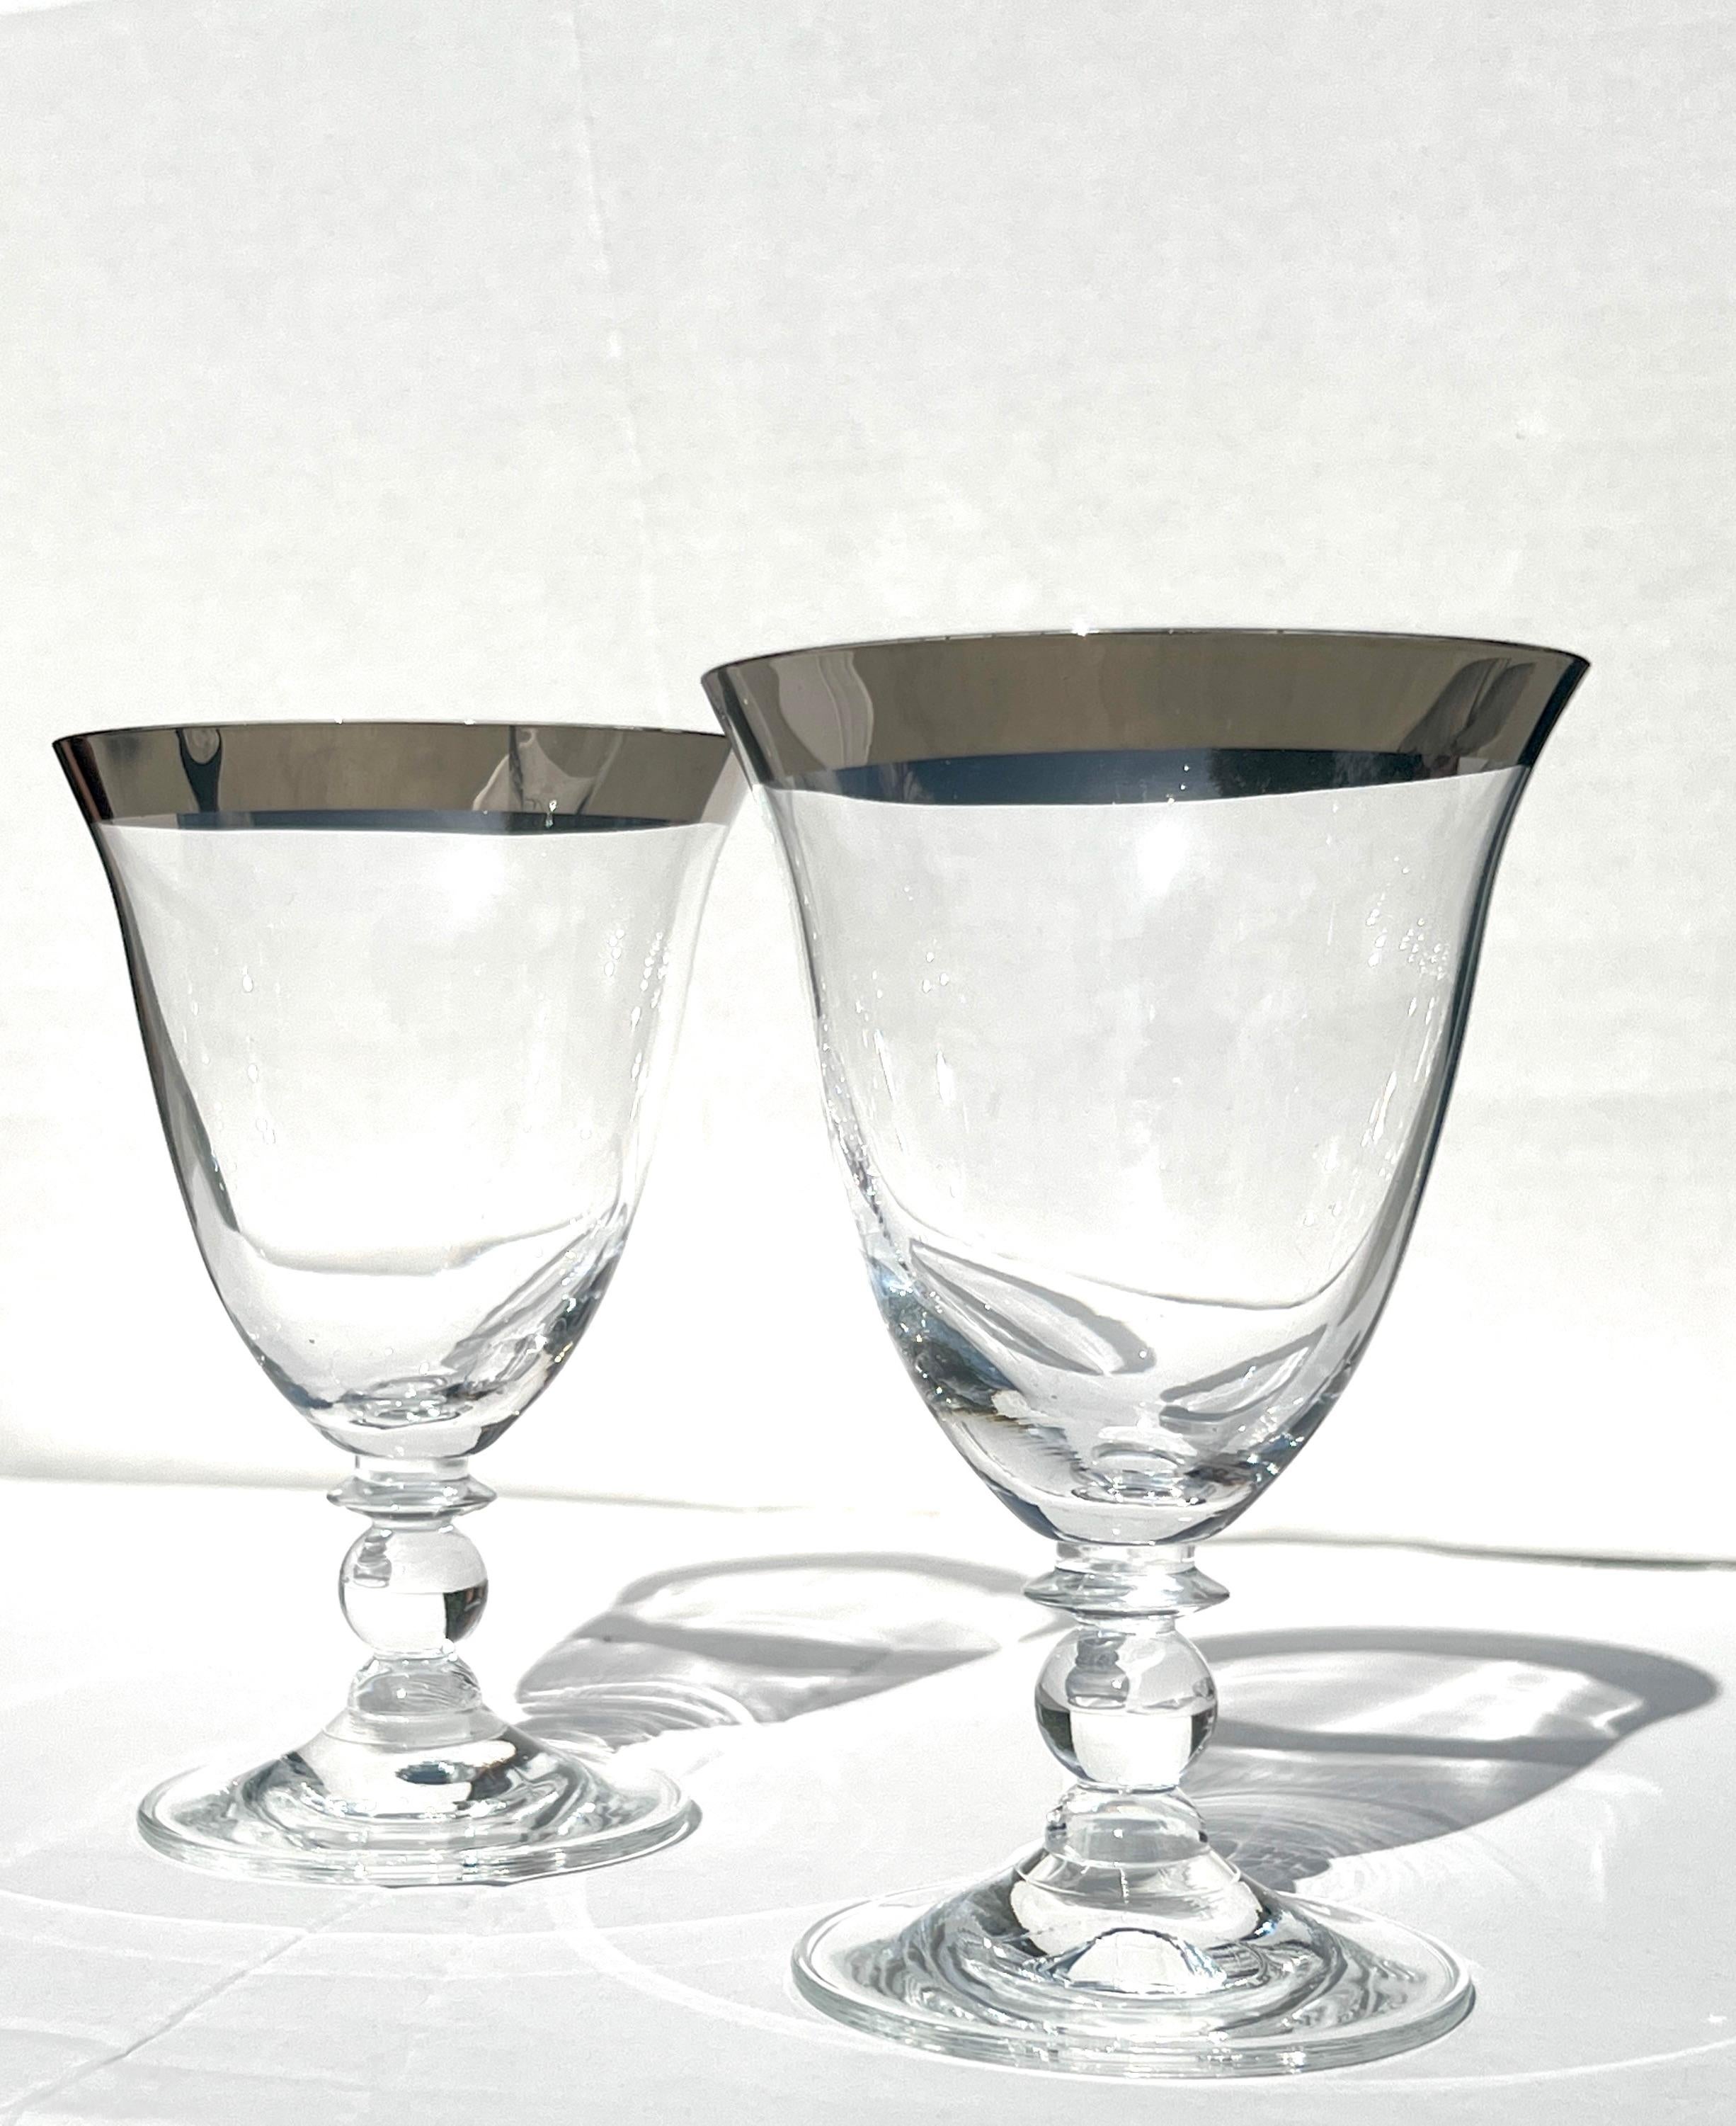 Set of four vintage water or wine goblet glasses by Dorothy Thorpe.  The blown glasses feature short stems with glass ball fittings and the iconic silver rim synonymous with Thorpe designs.  Make an elegant and cheerful addition to any dinnerware